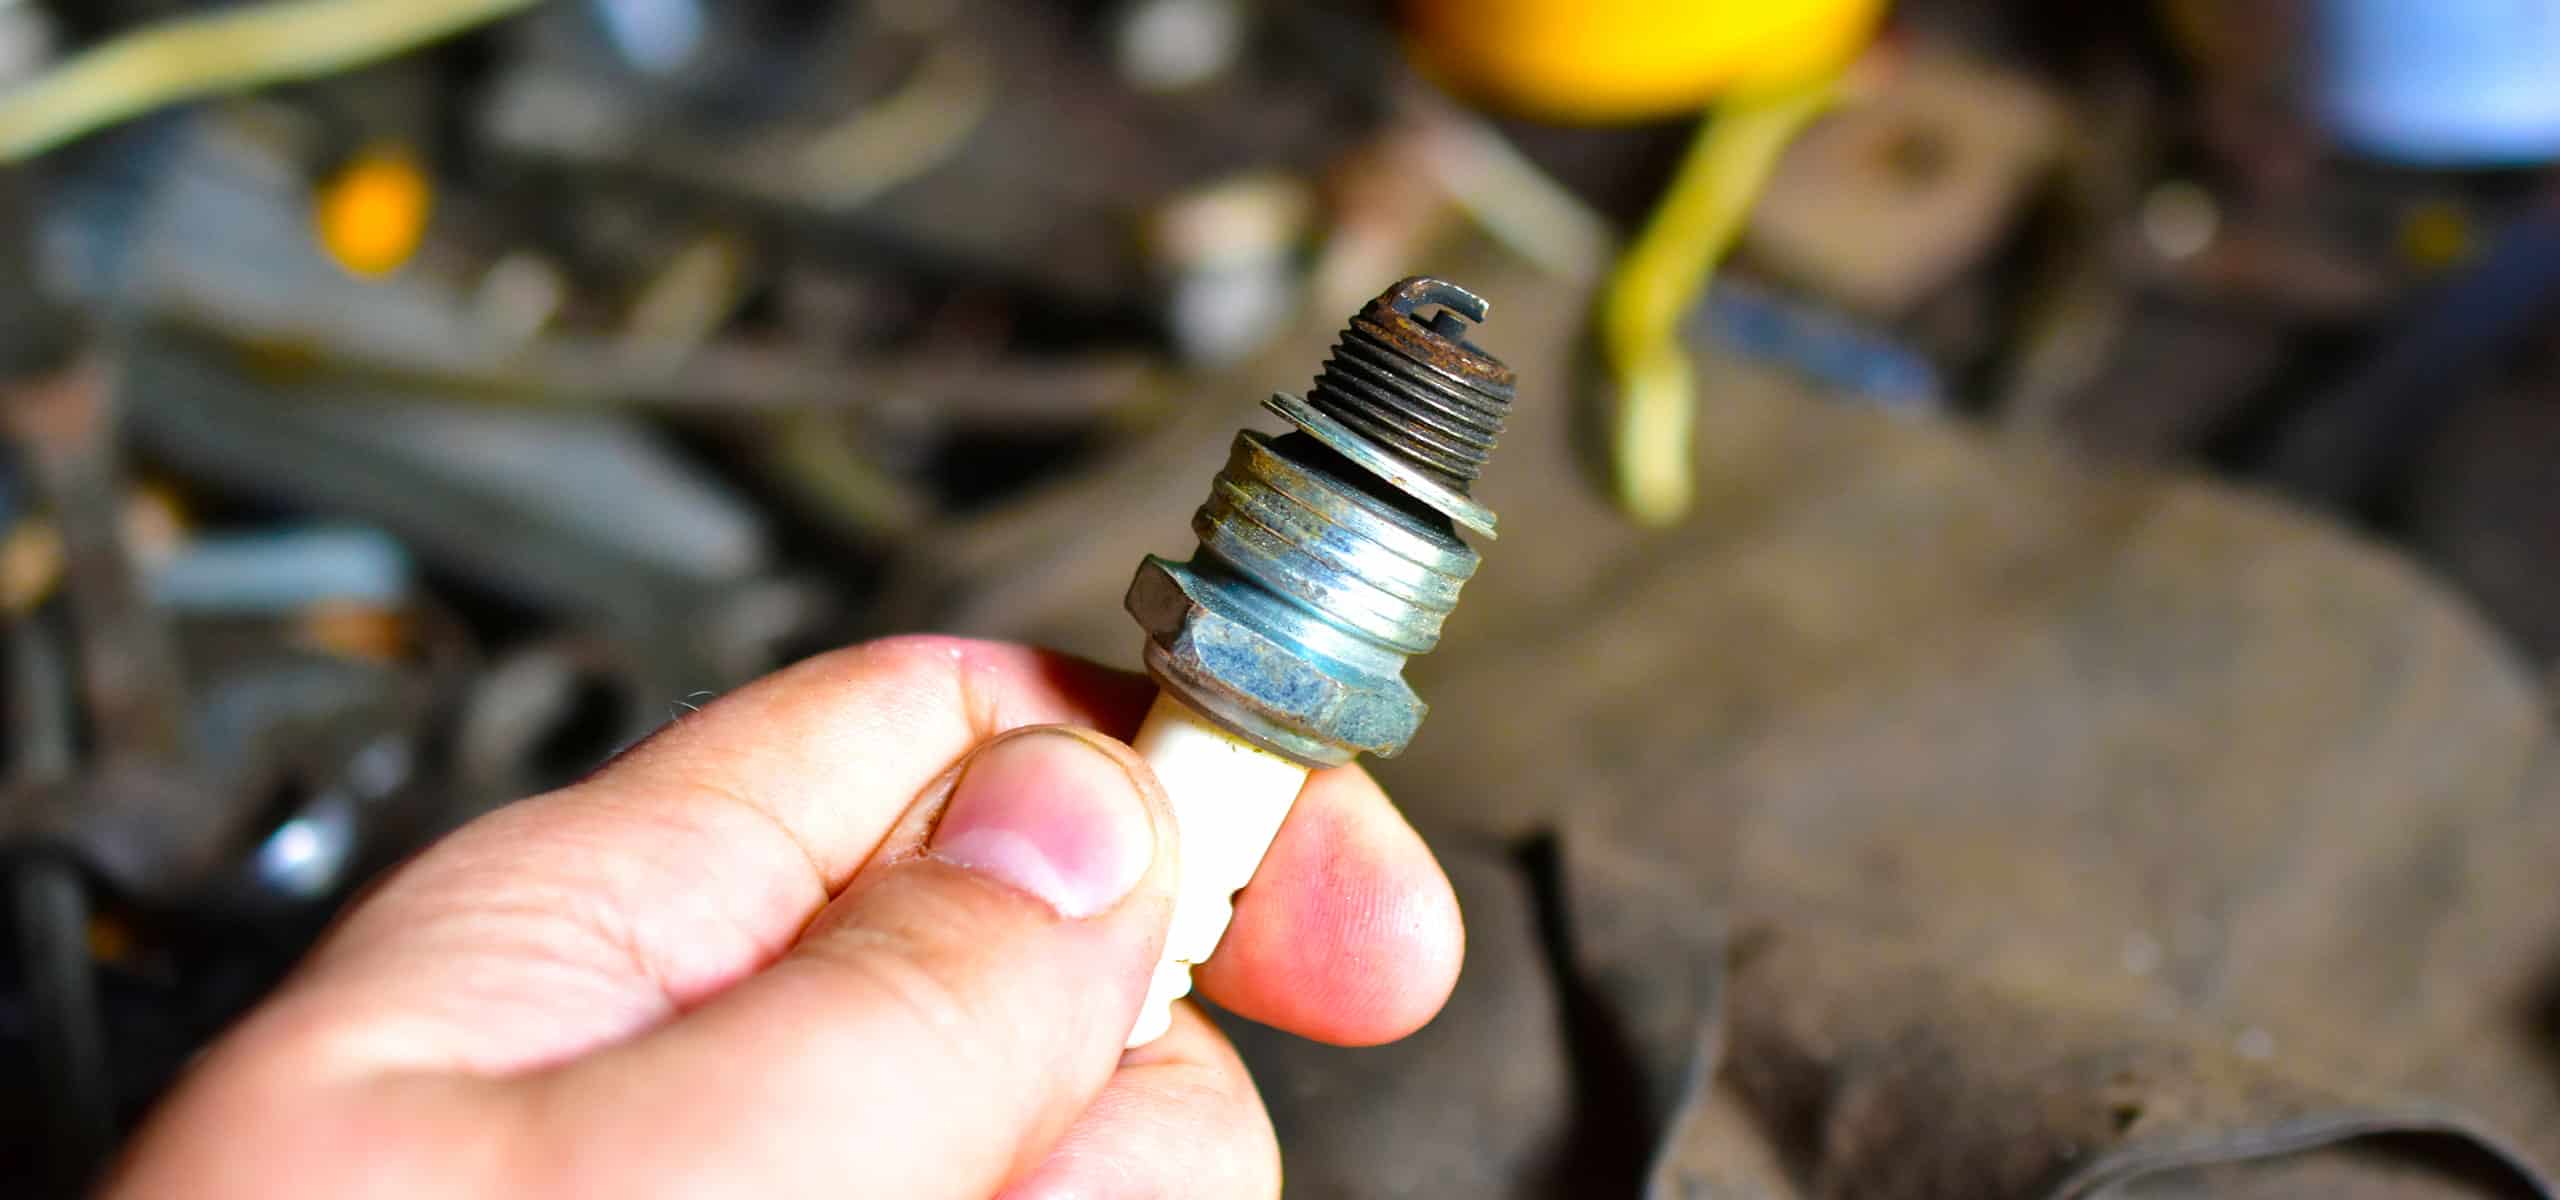 Check your spark plugs when tuning your vehicle